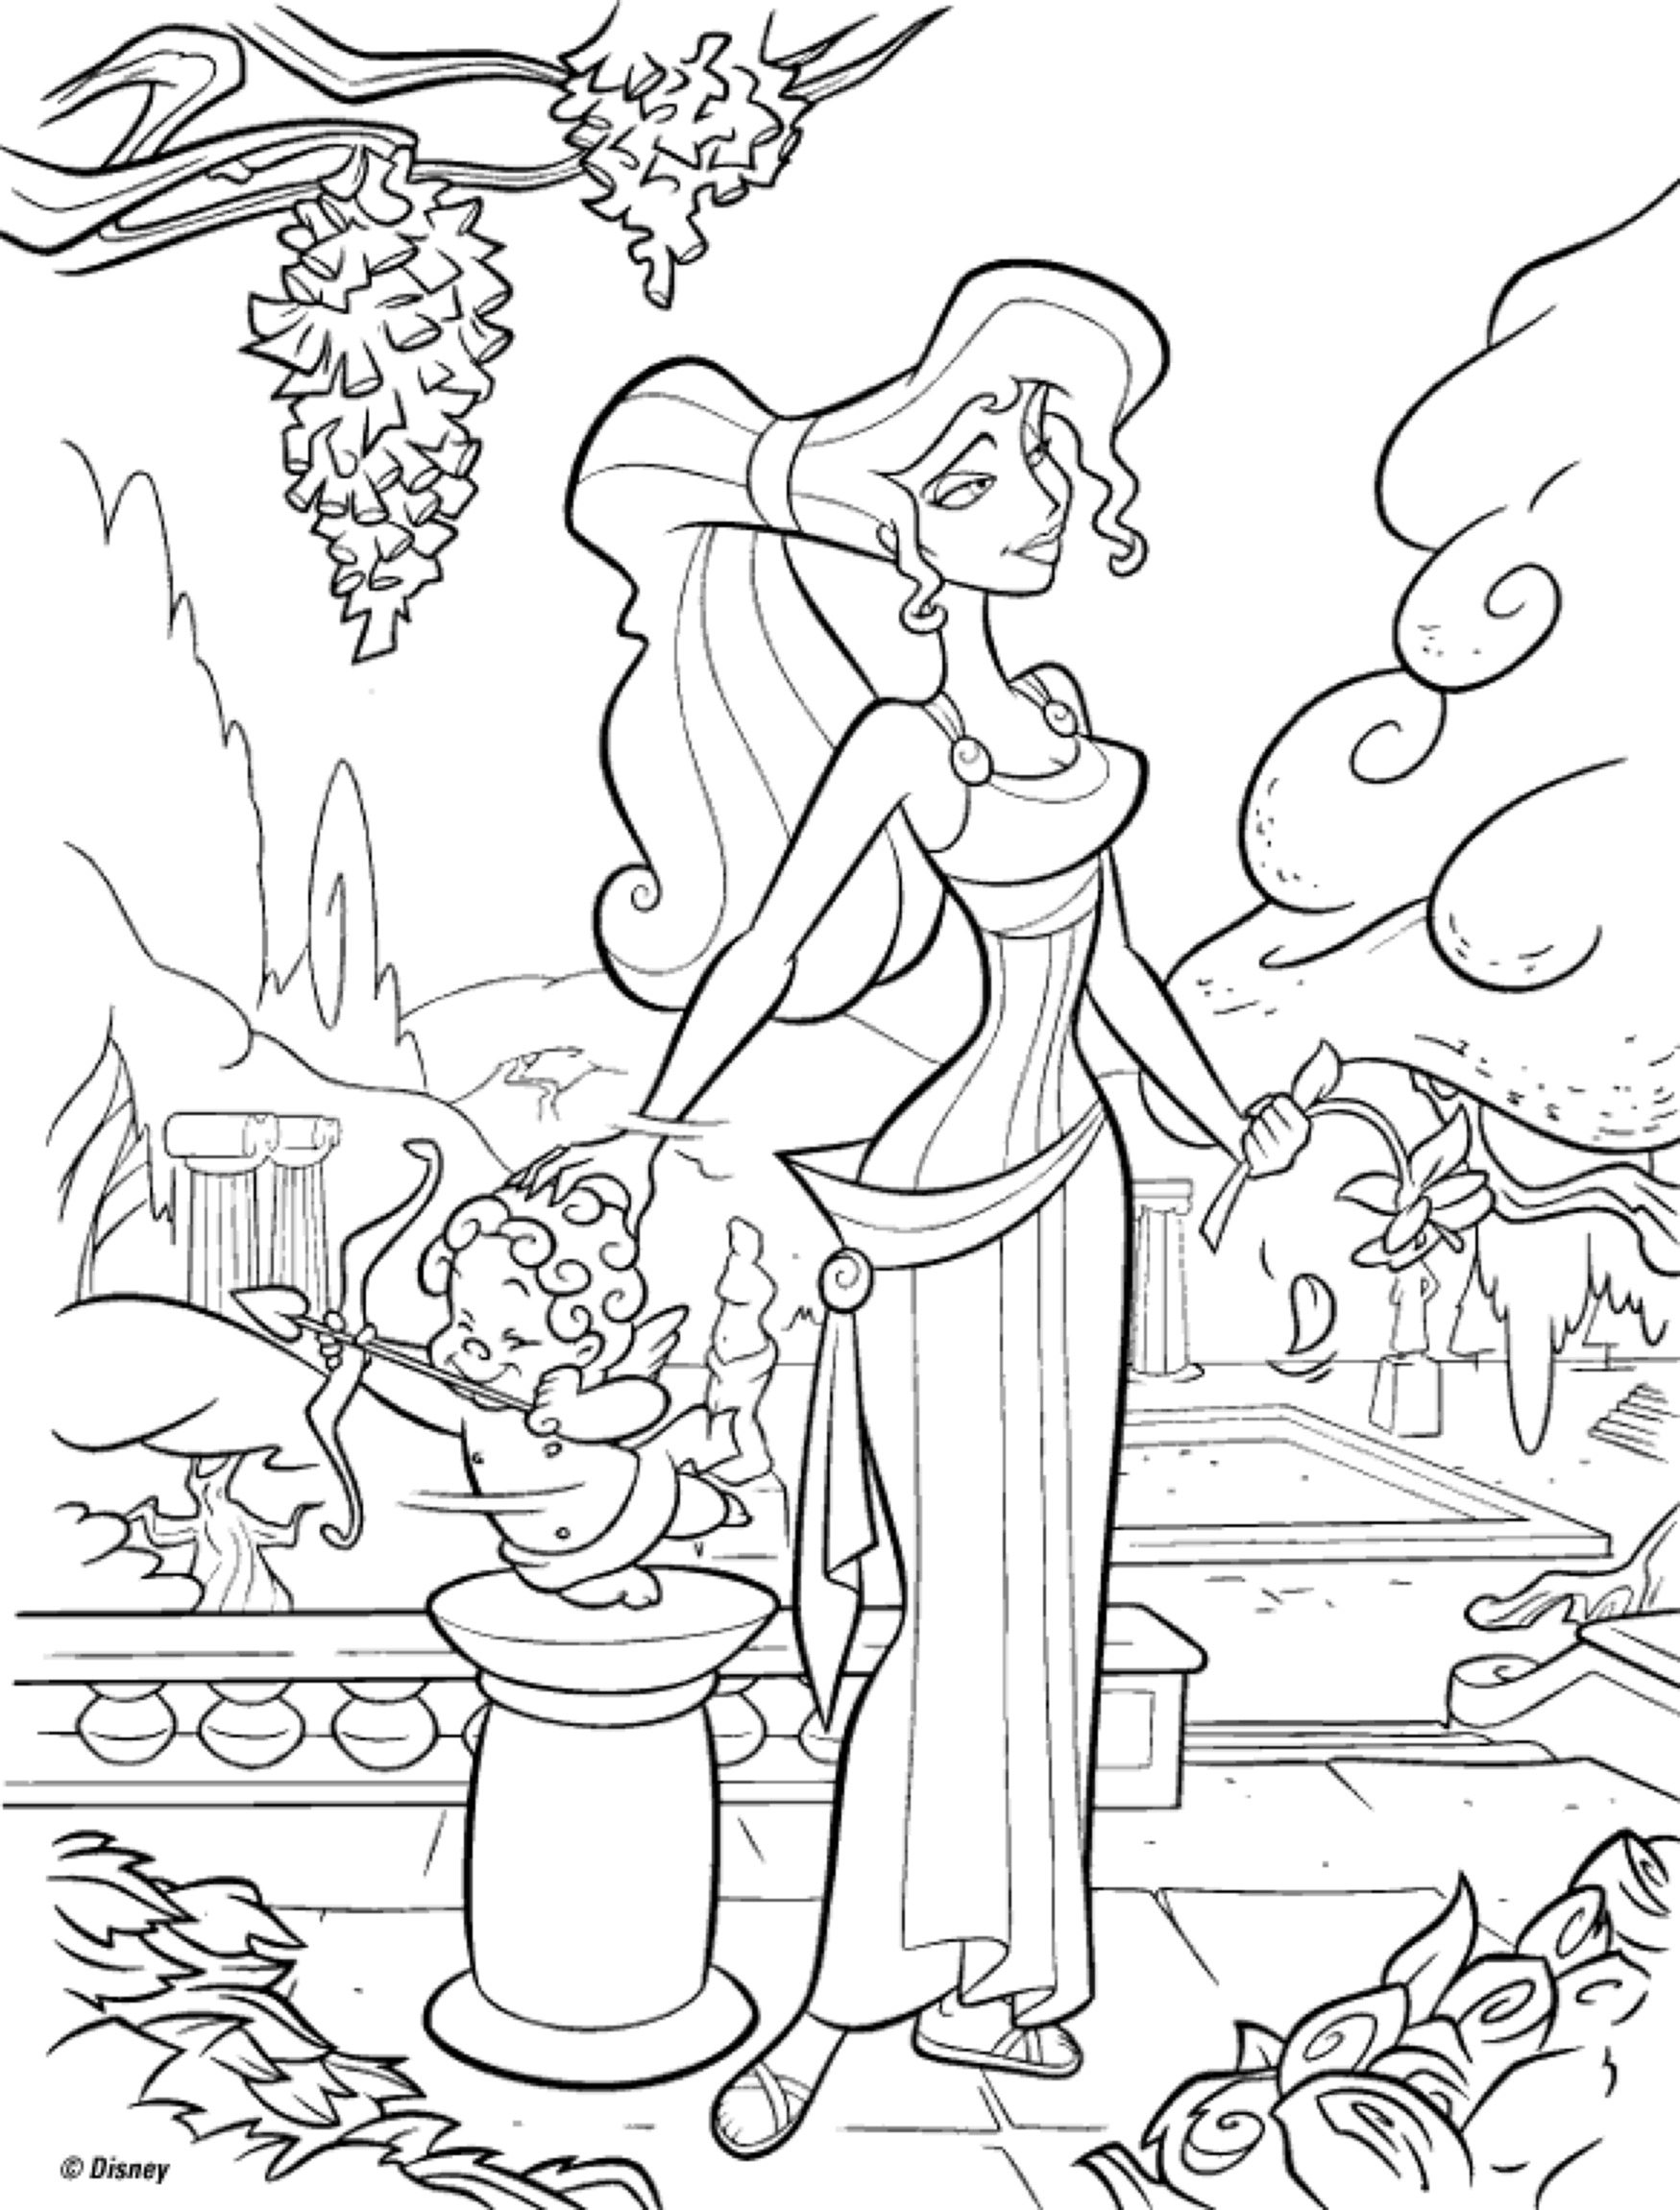 Hercules And Meg - Coloring Pages for Kids and for Adults